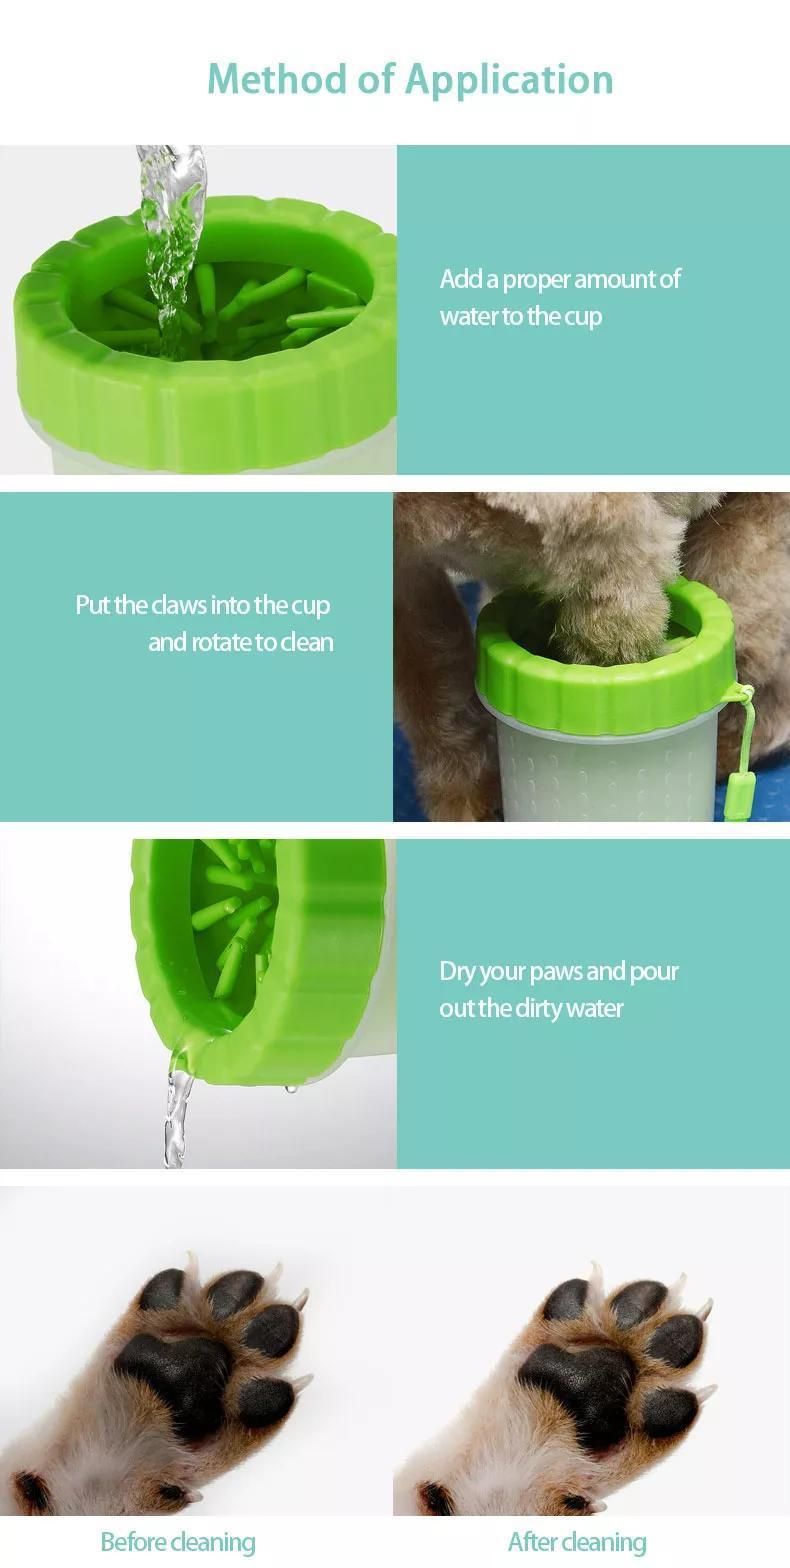 New Gadget Pet Products Automatic Pet Paw Cleaner